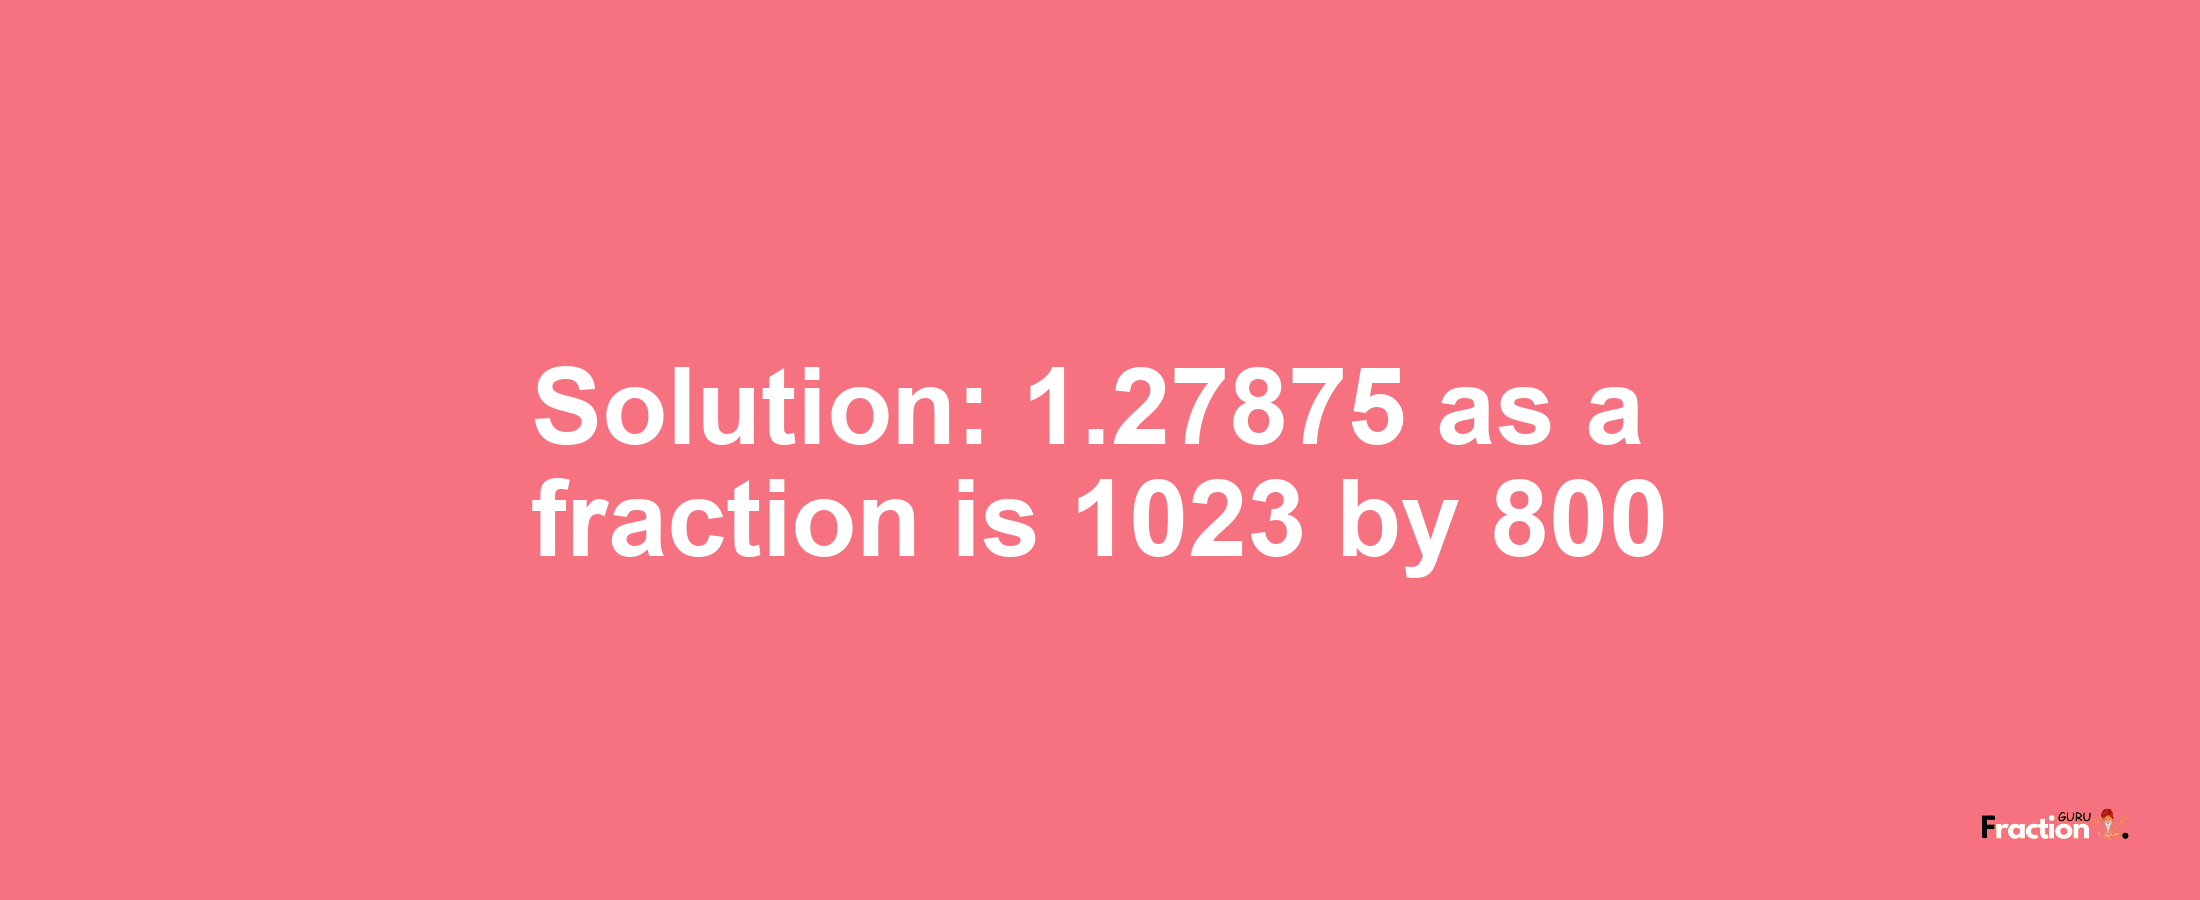 Solution:1.27875 as a fraction is 1023/800